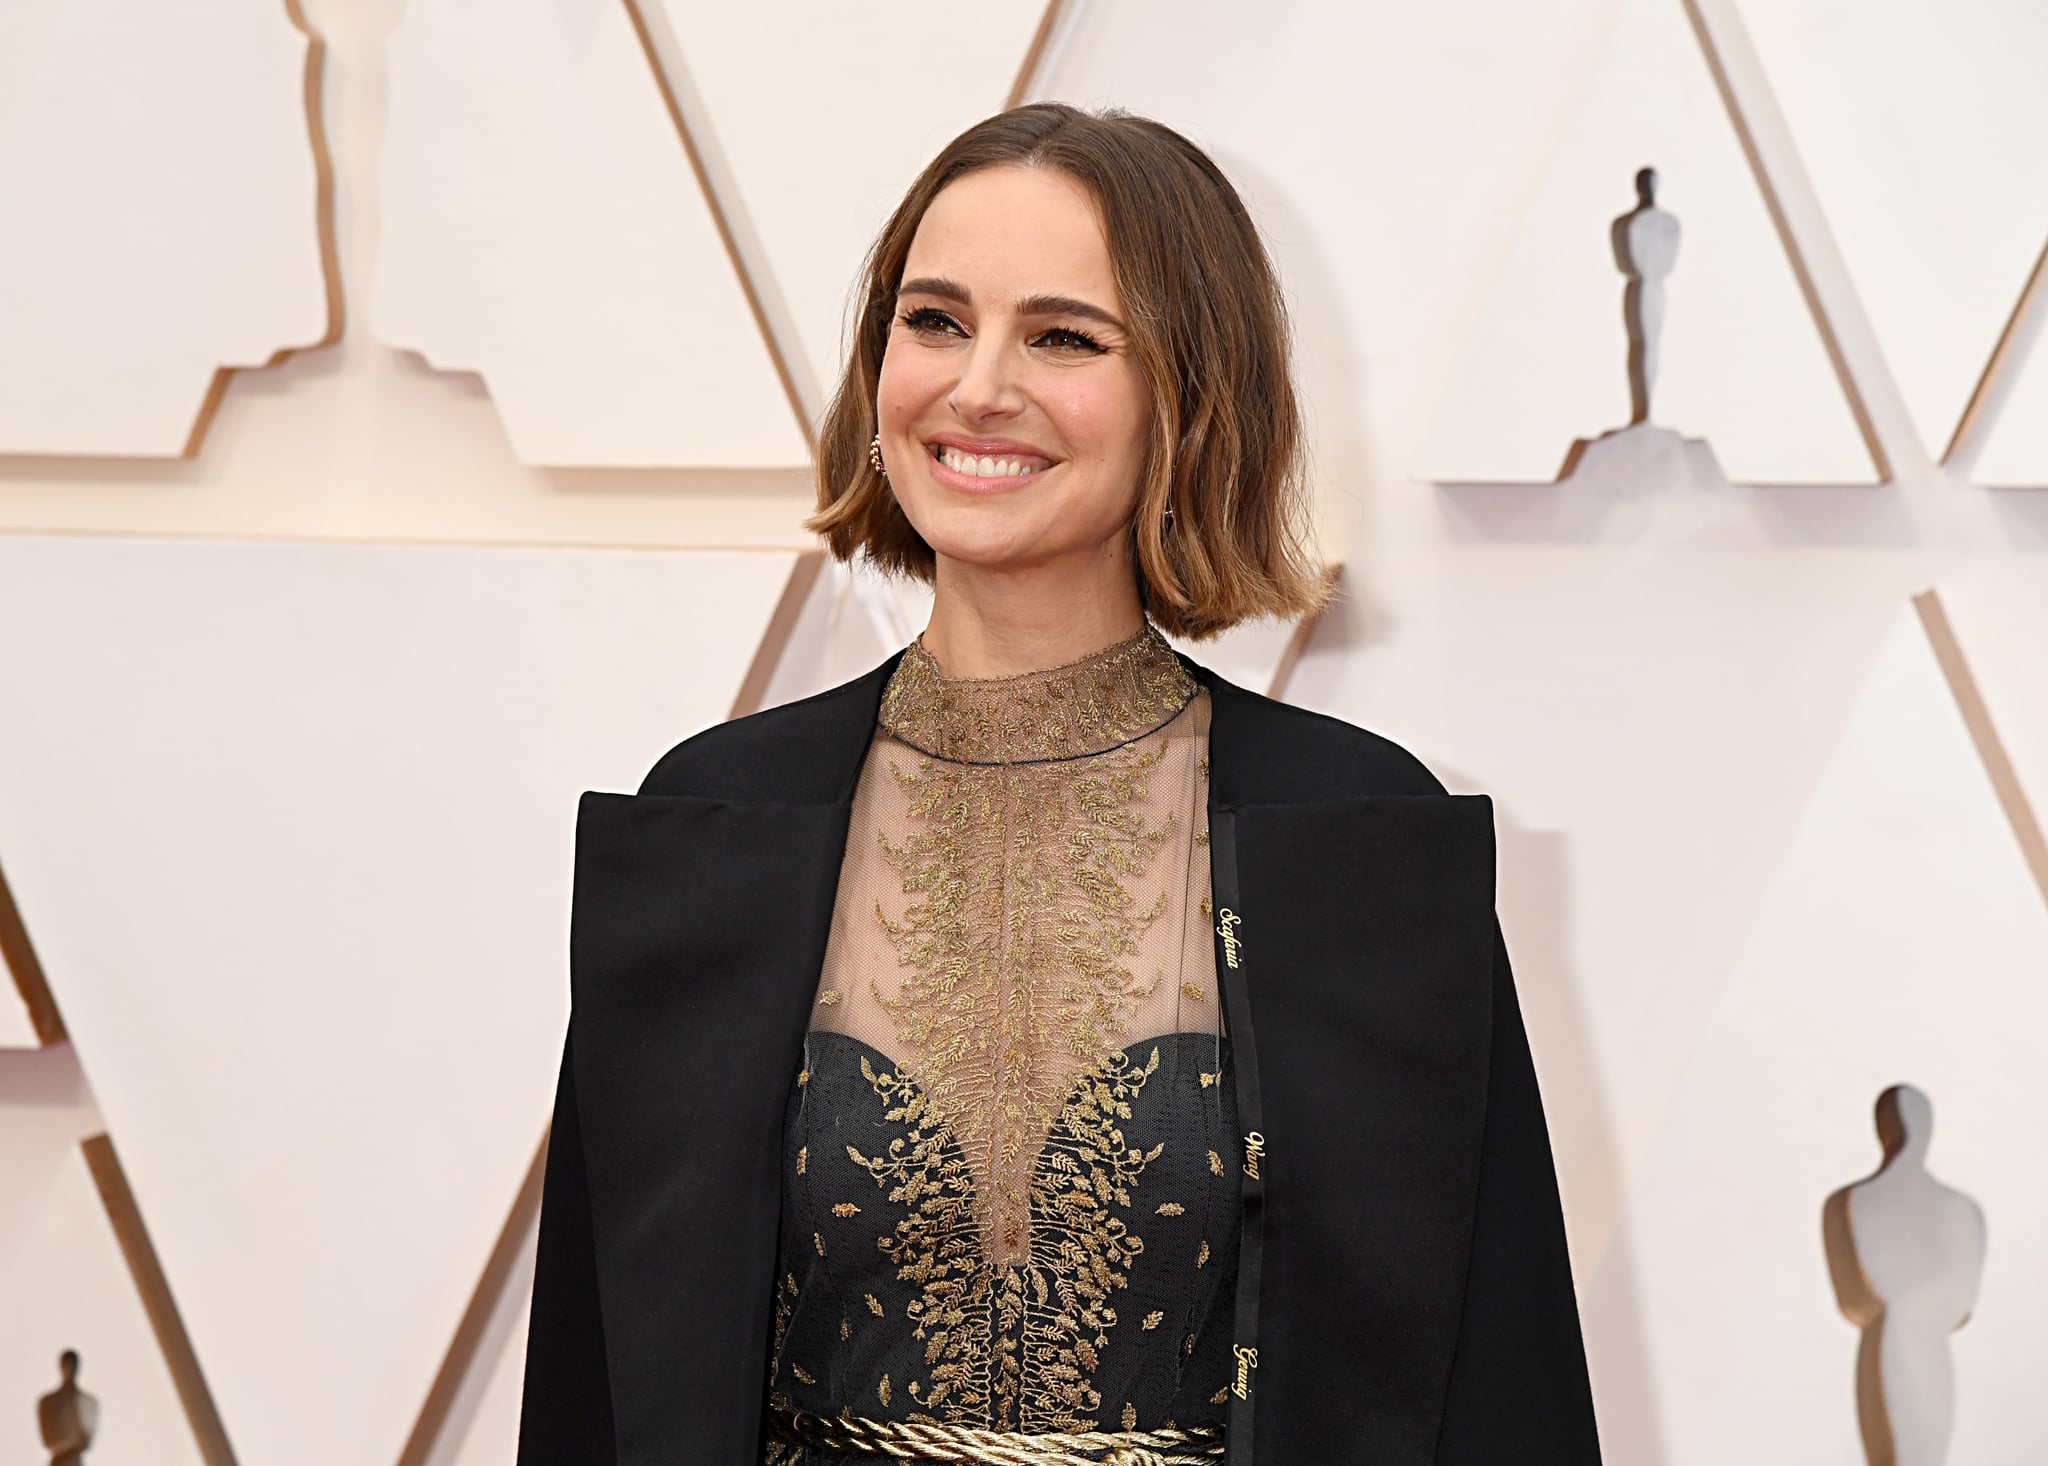 HOLLYWOOD, CALIFORNIA - FEBRUARY 09: Natalie Portman attends the 92nd Annual Academy Awards at Hollywood and Highland on February 09, 2020 in Hollywood, California. (Photo by Jeff Kravitz/FilmMagic)